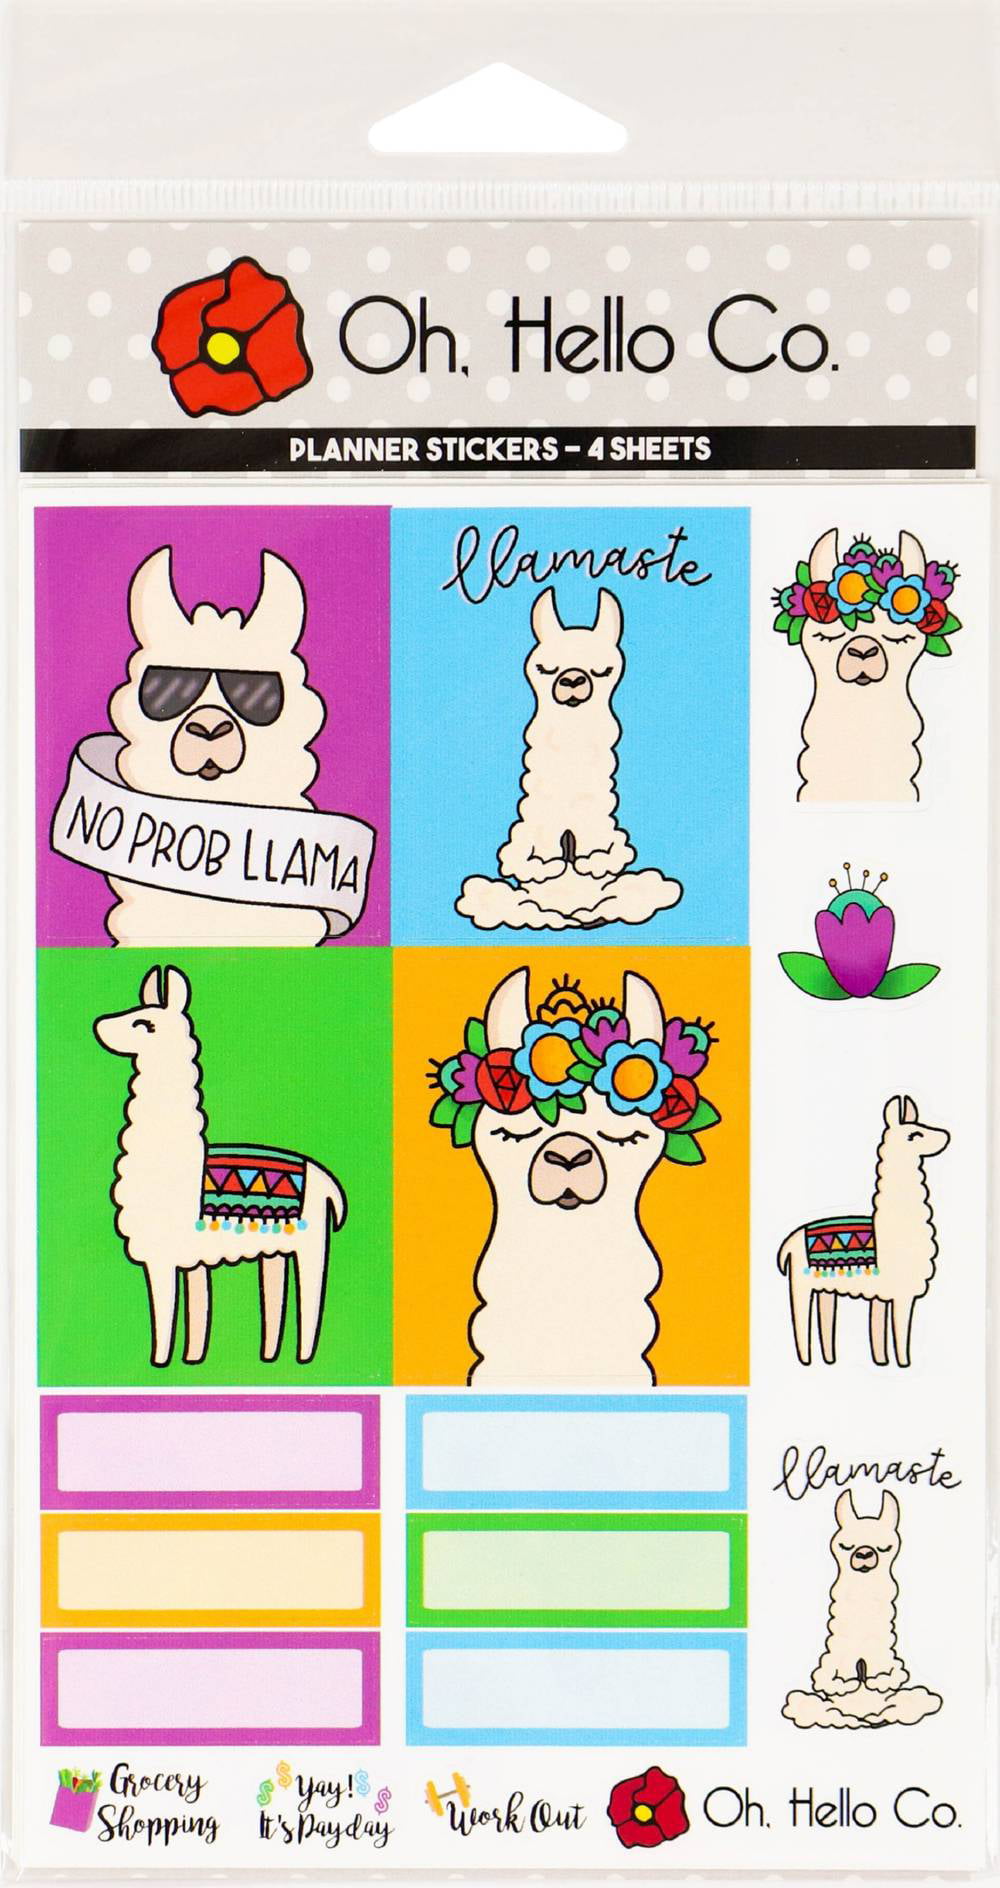 iPad Stickers PNG Stickers Hello Llama Digital Stickers Kit Digital Stickers Digital Planner Stickers GoodNotes Planner